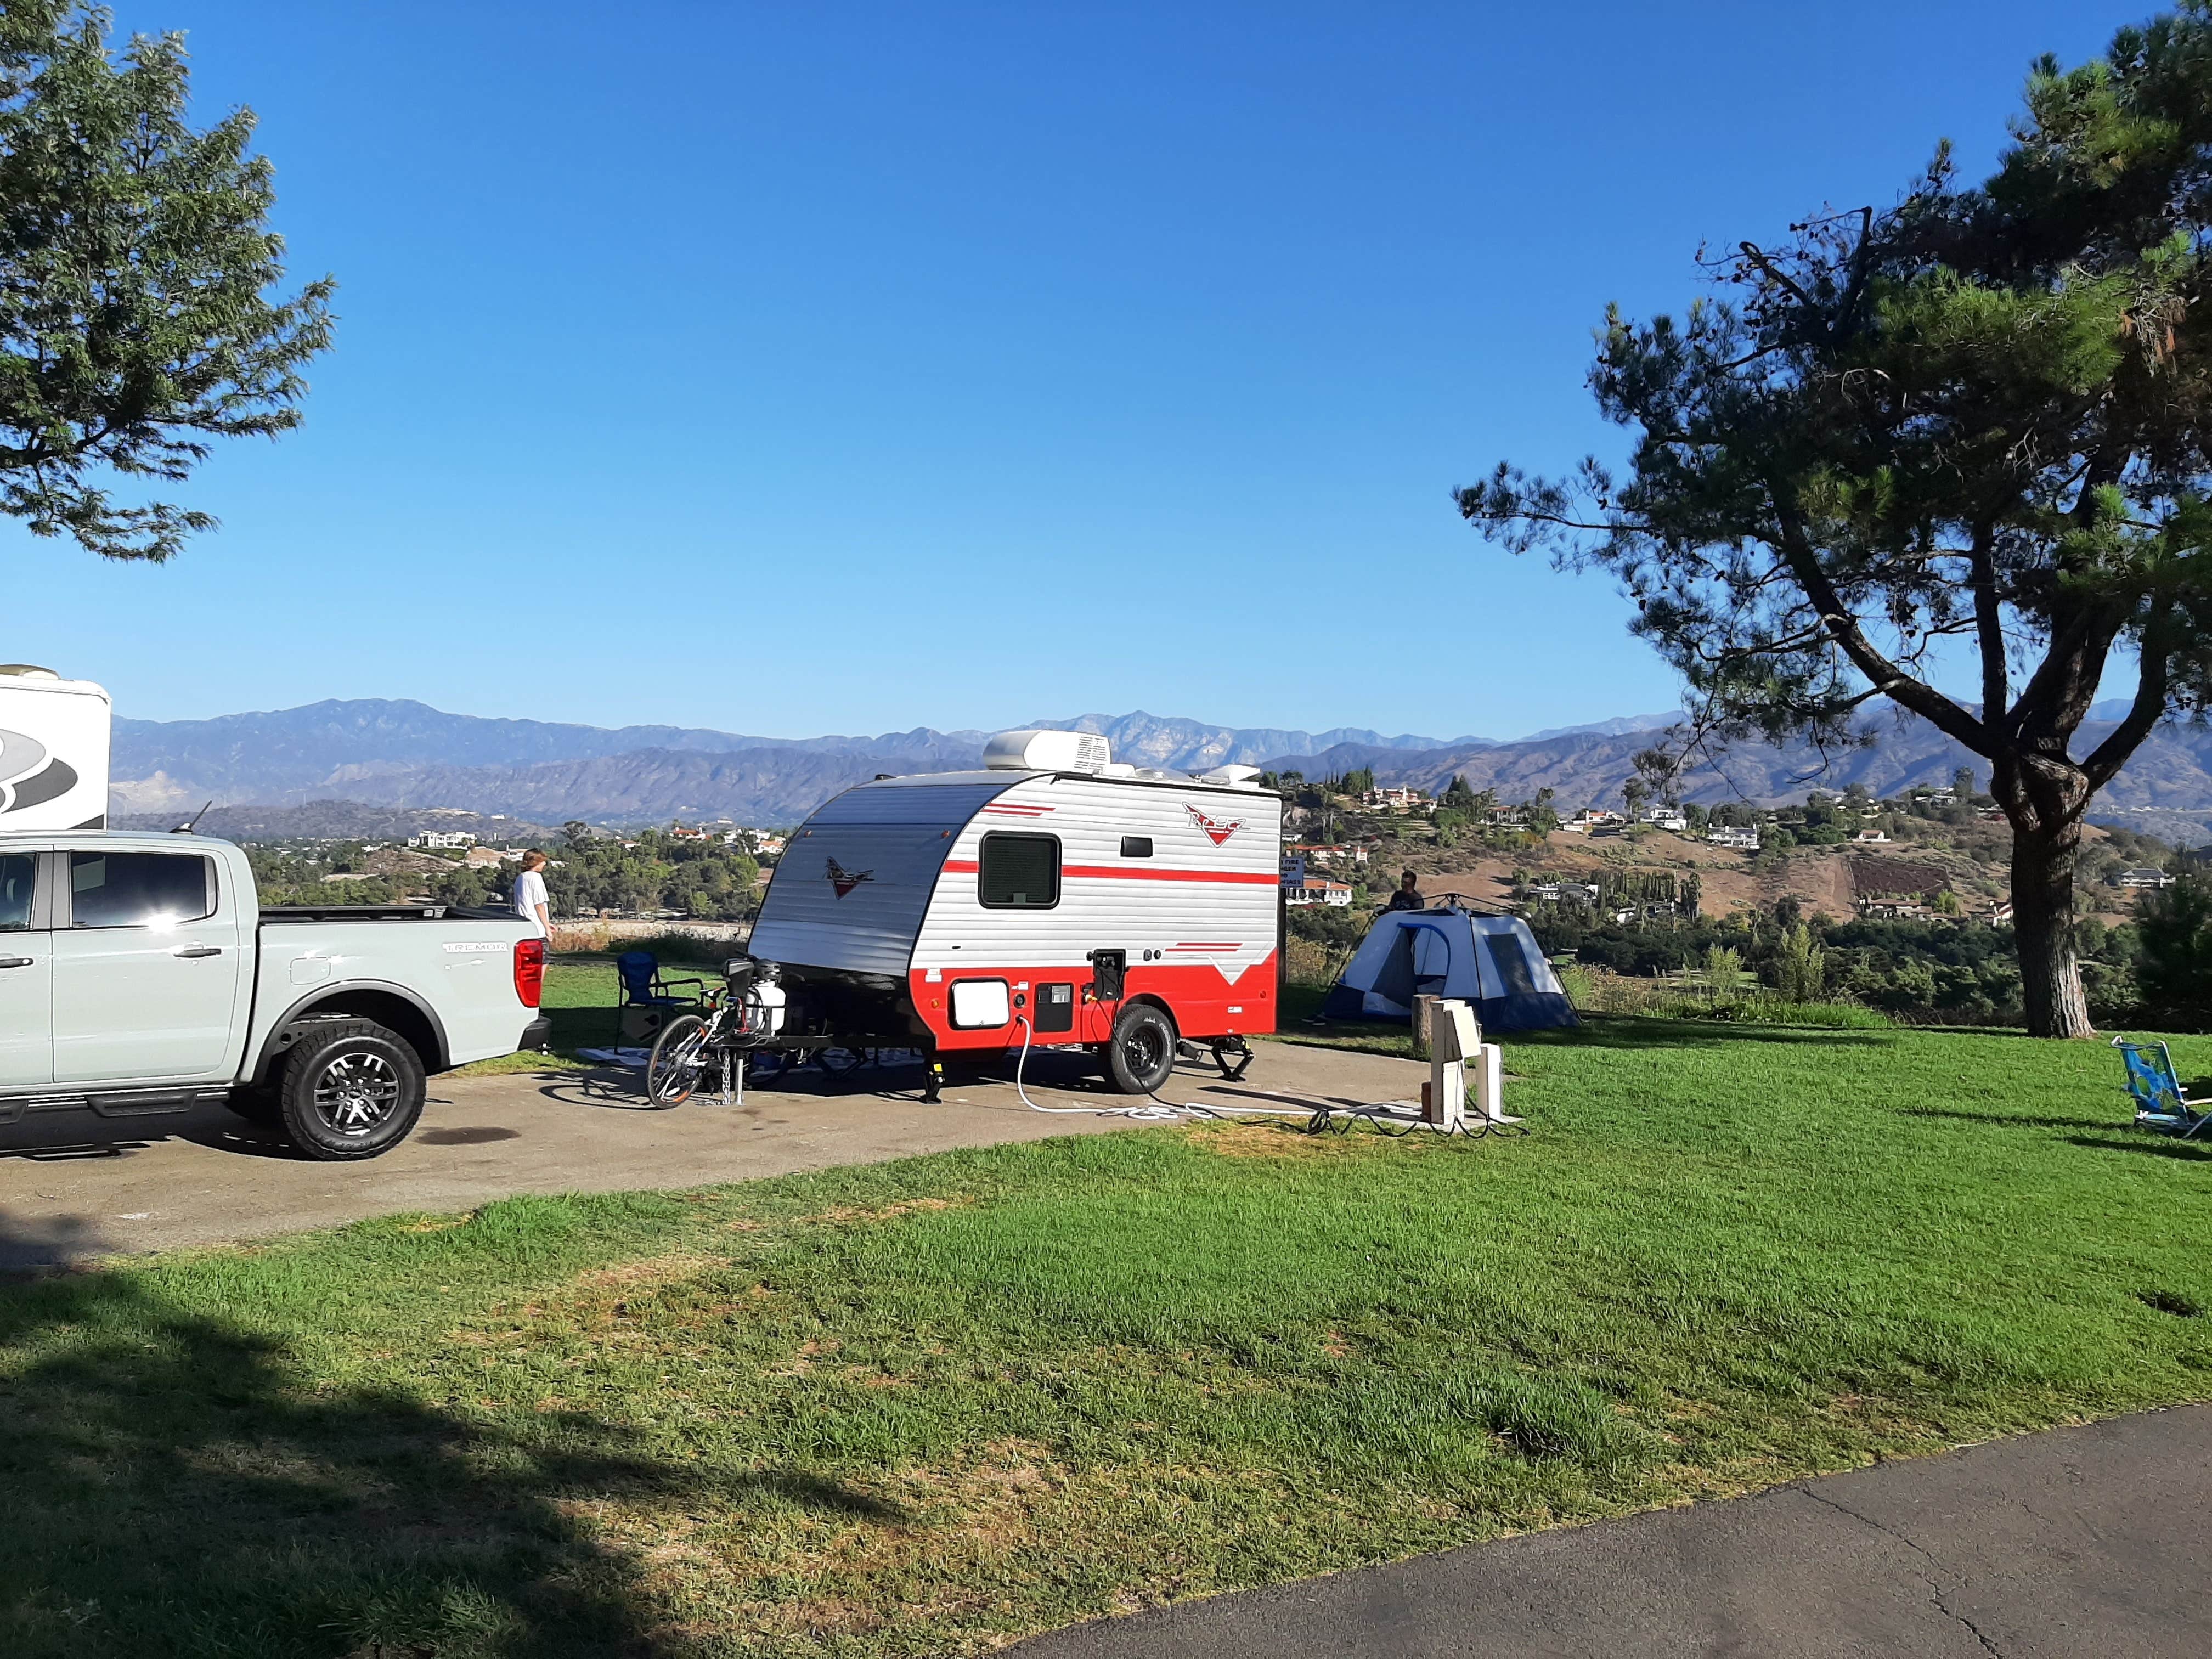 Camper submitted image from Bonelli Bluffs - 1